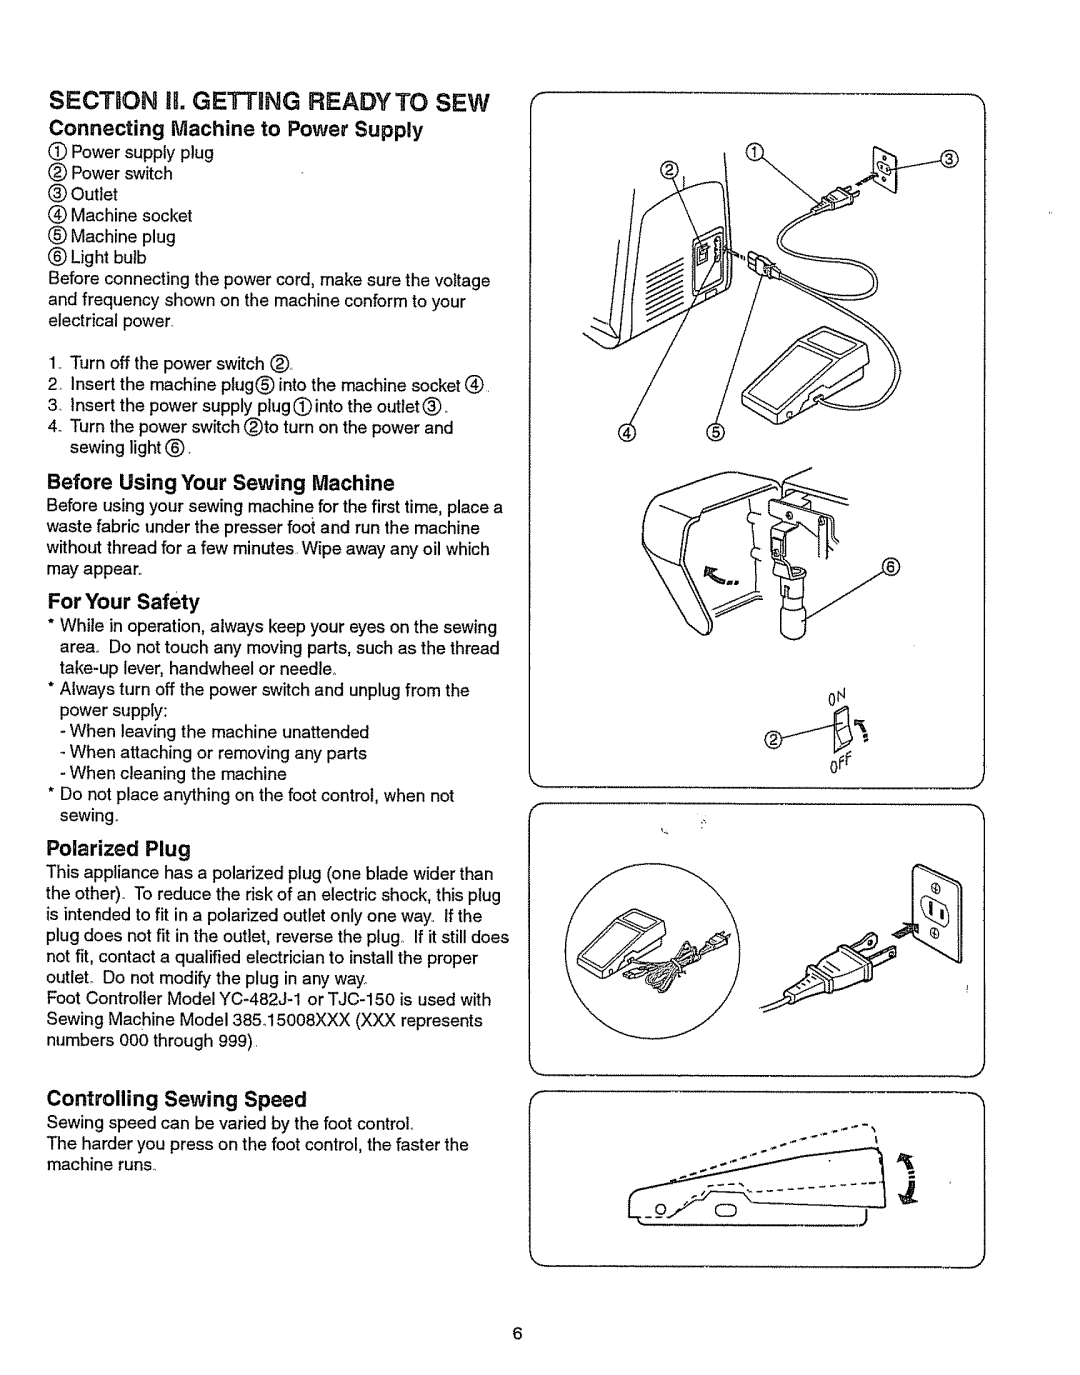 Kenmore 385.151082 owner manual Before Using Your Sewing Machine, For Your Safety, Polarized Plug, Controlling Sewing Speed 